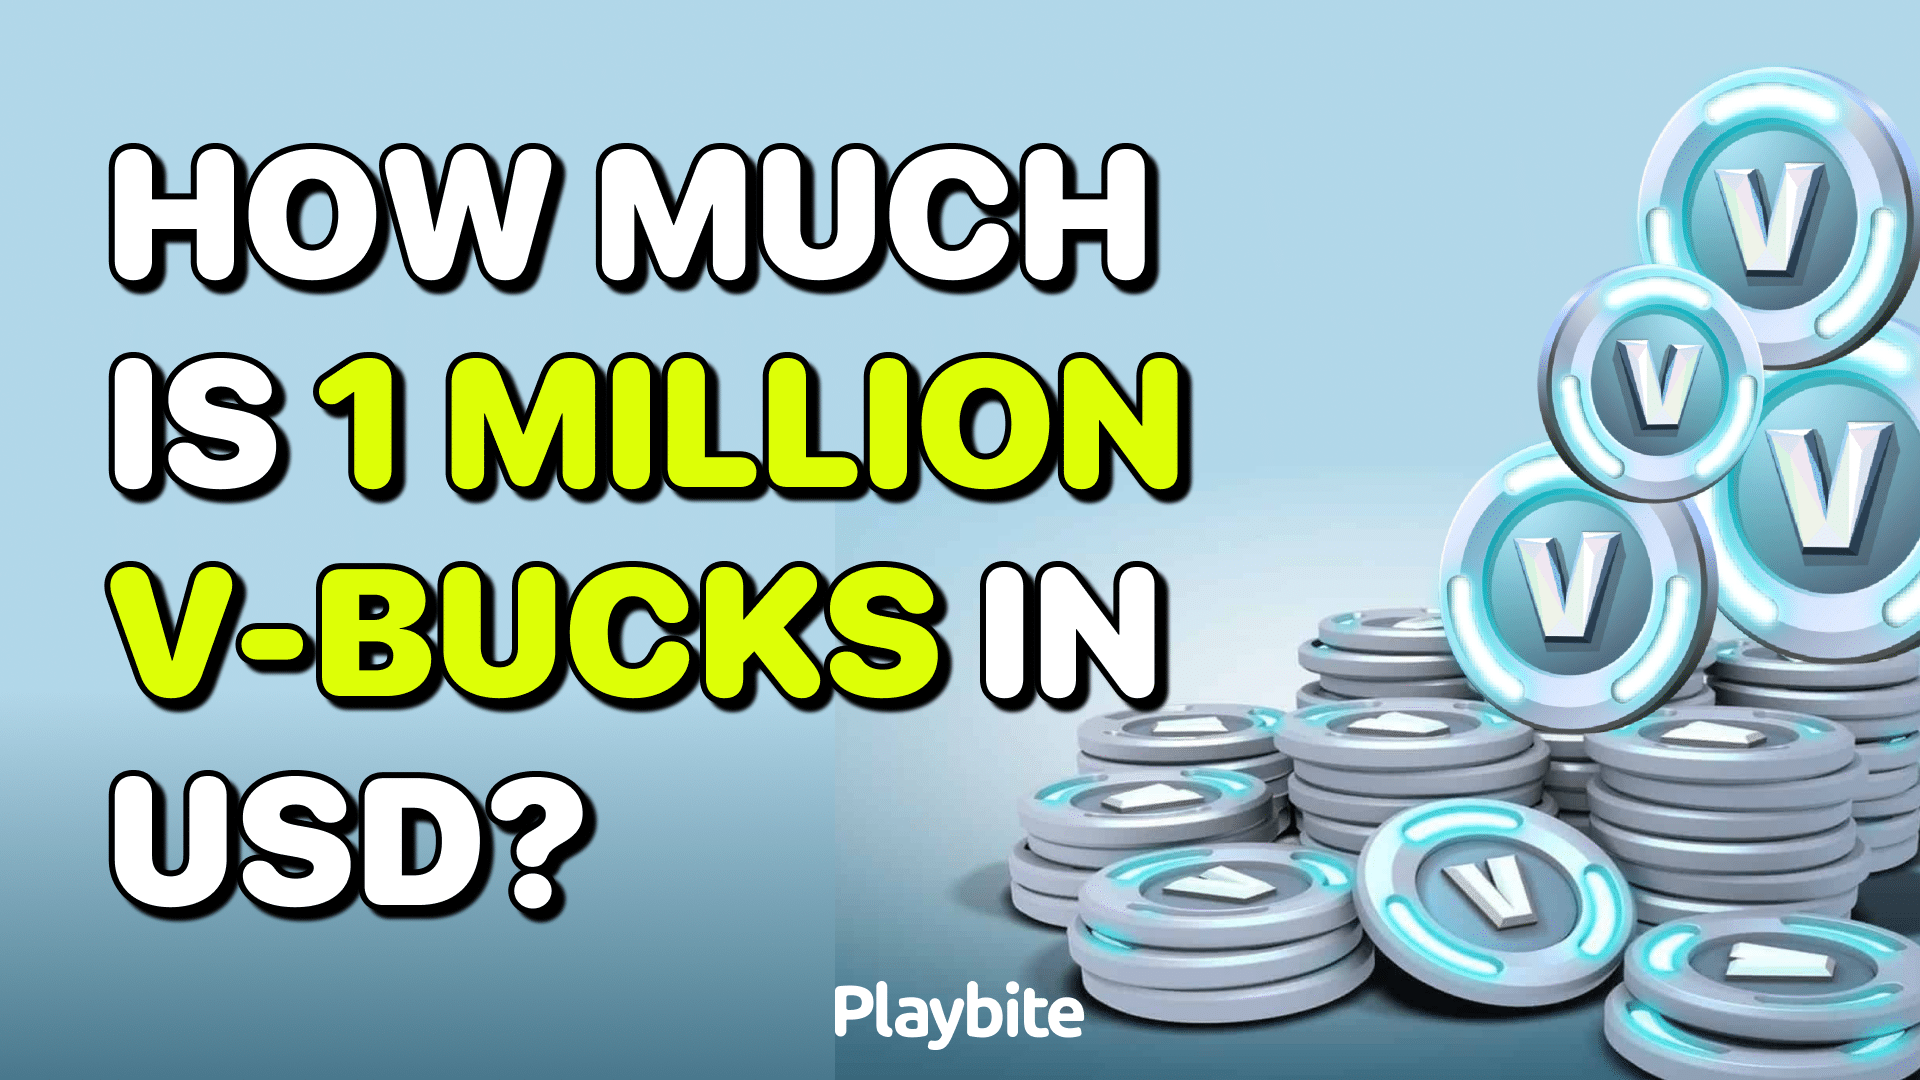 How Much Is 1 Million V-Bucks In USD?